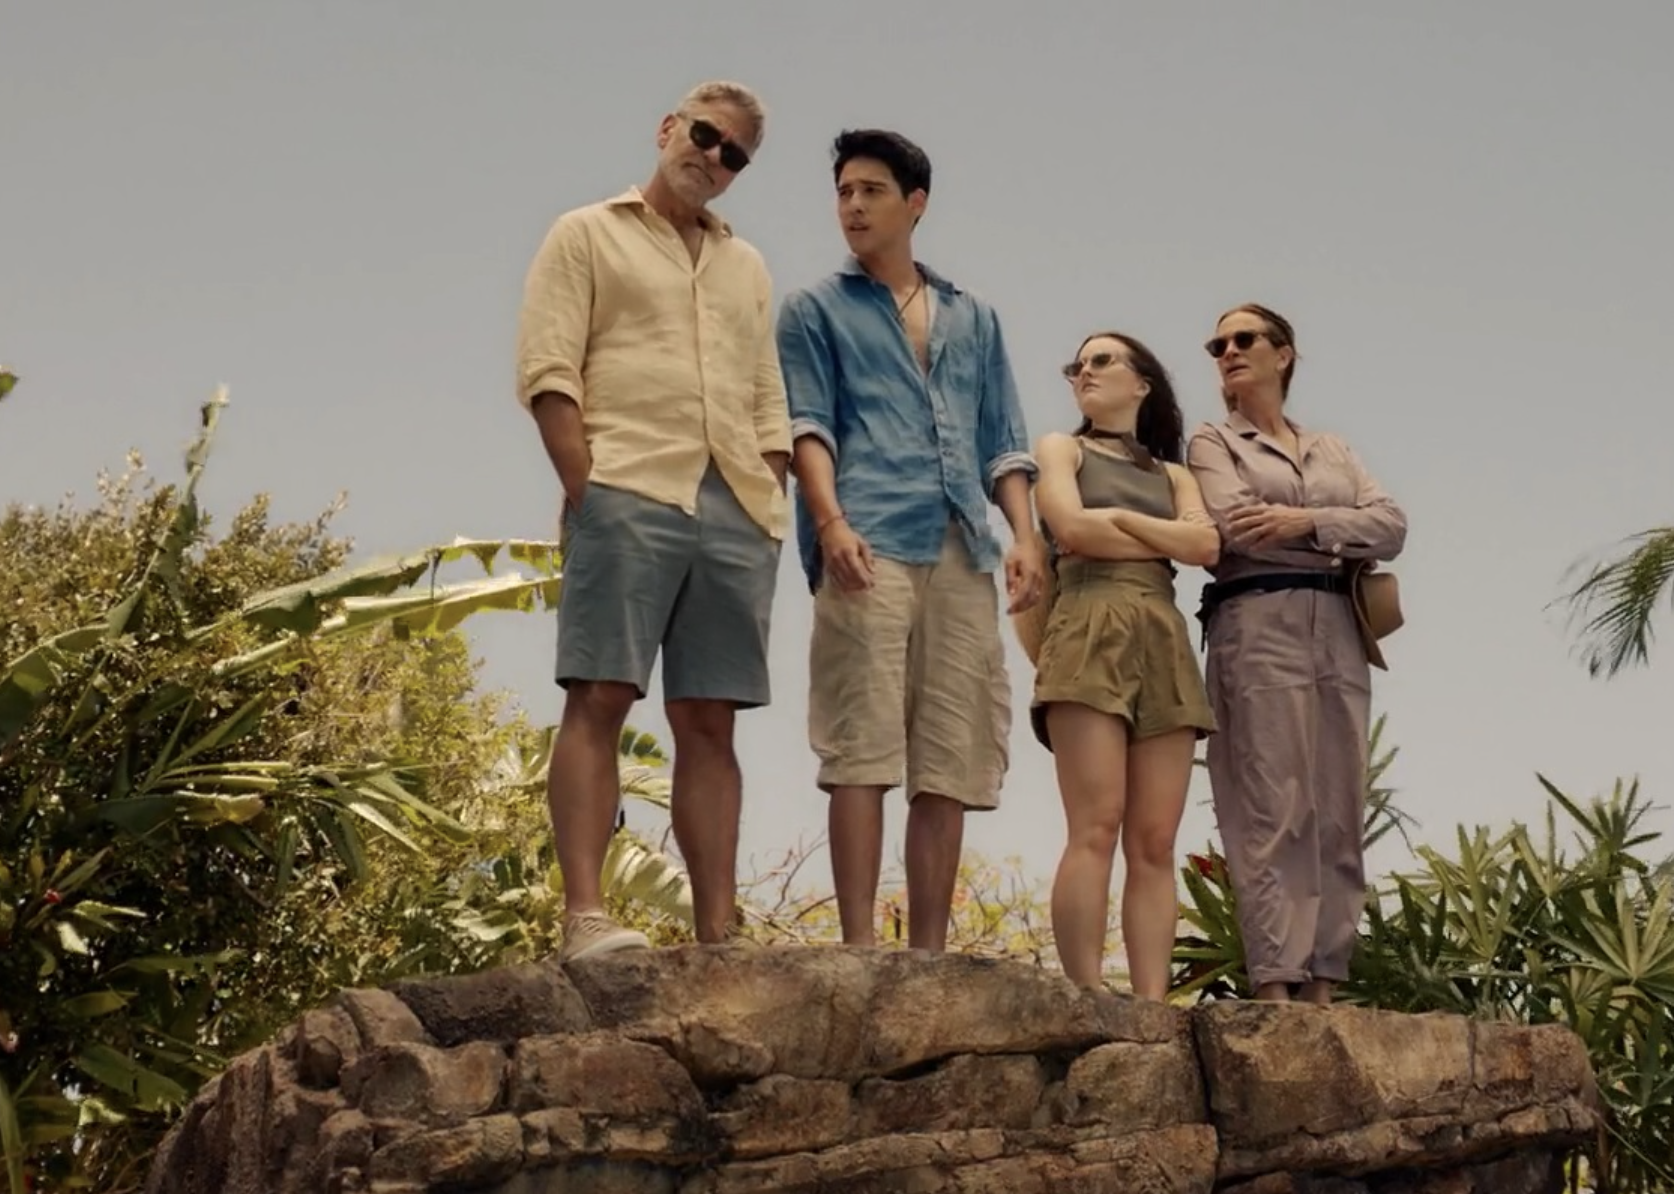 George Clooney, Julia Roberts, Kaitlyn Dever, and Maxime Bouttier in "Ticket to Paradise"